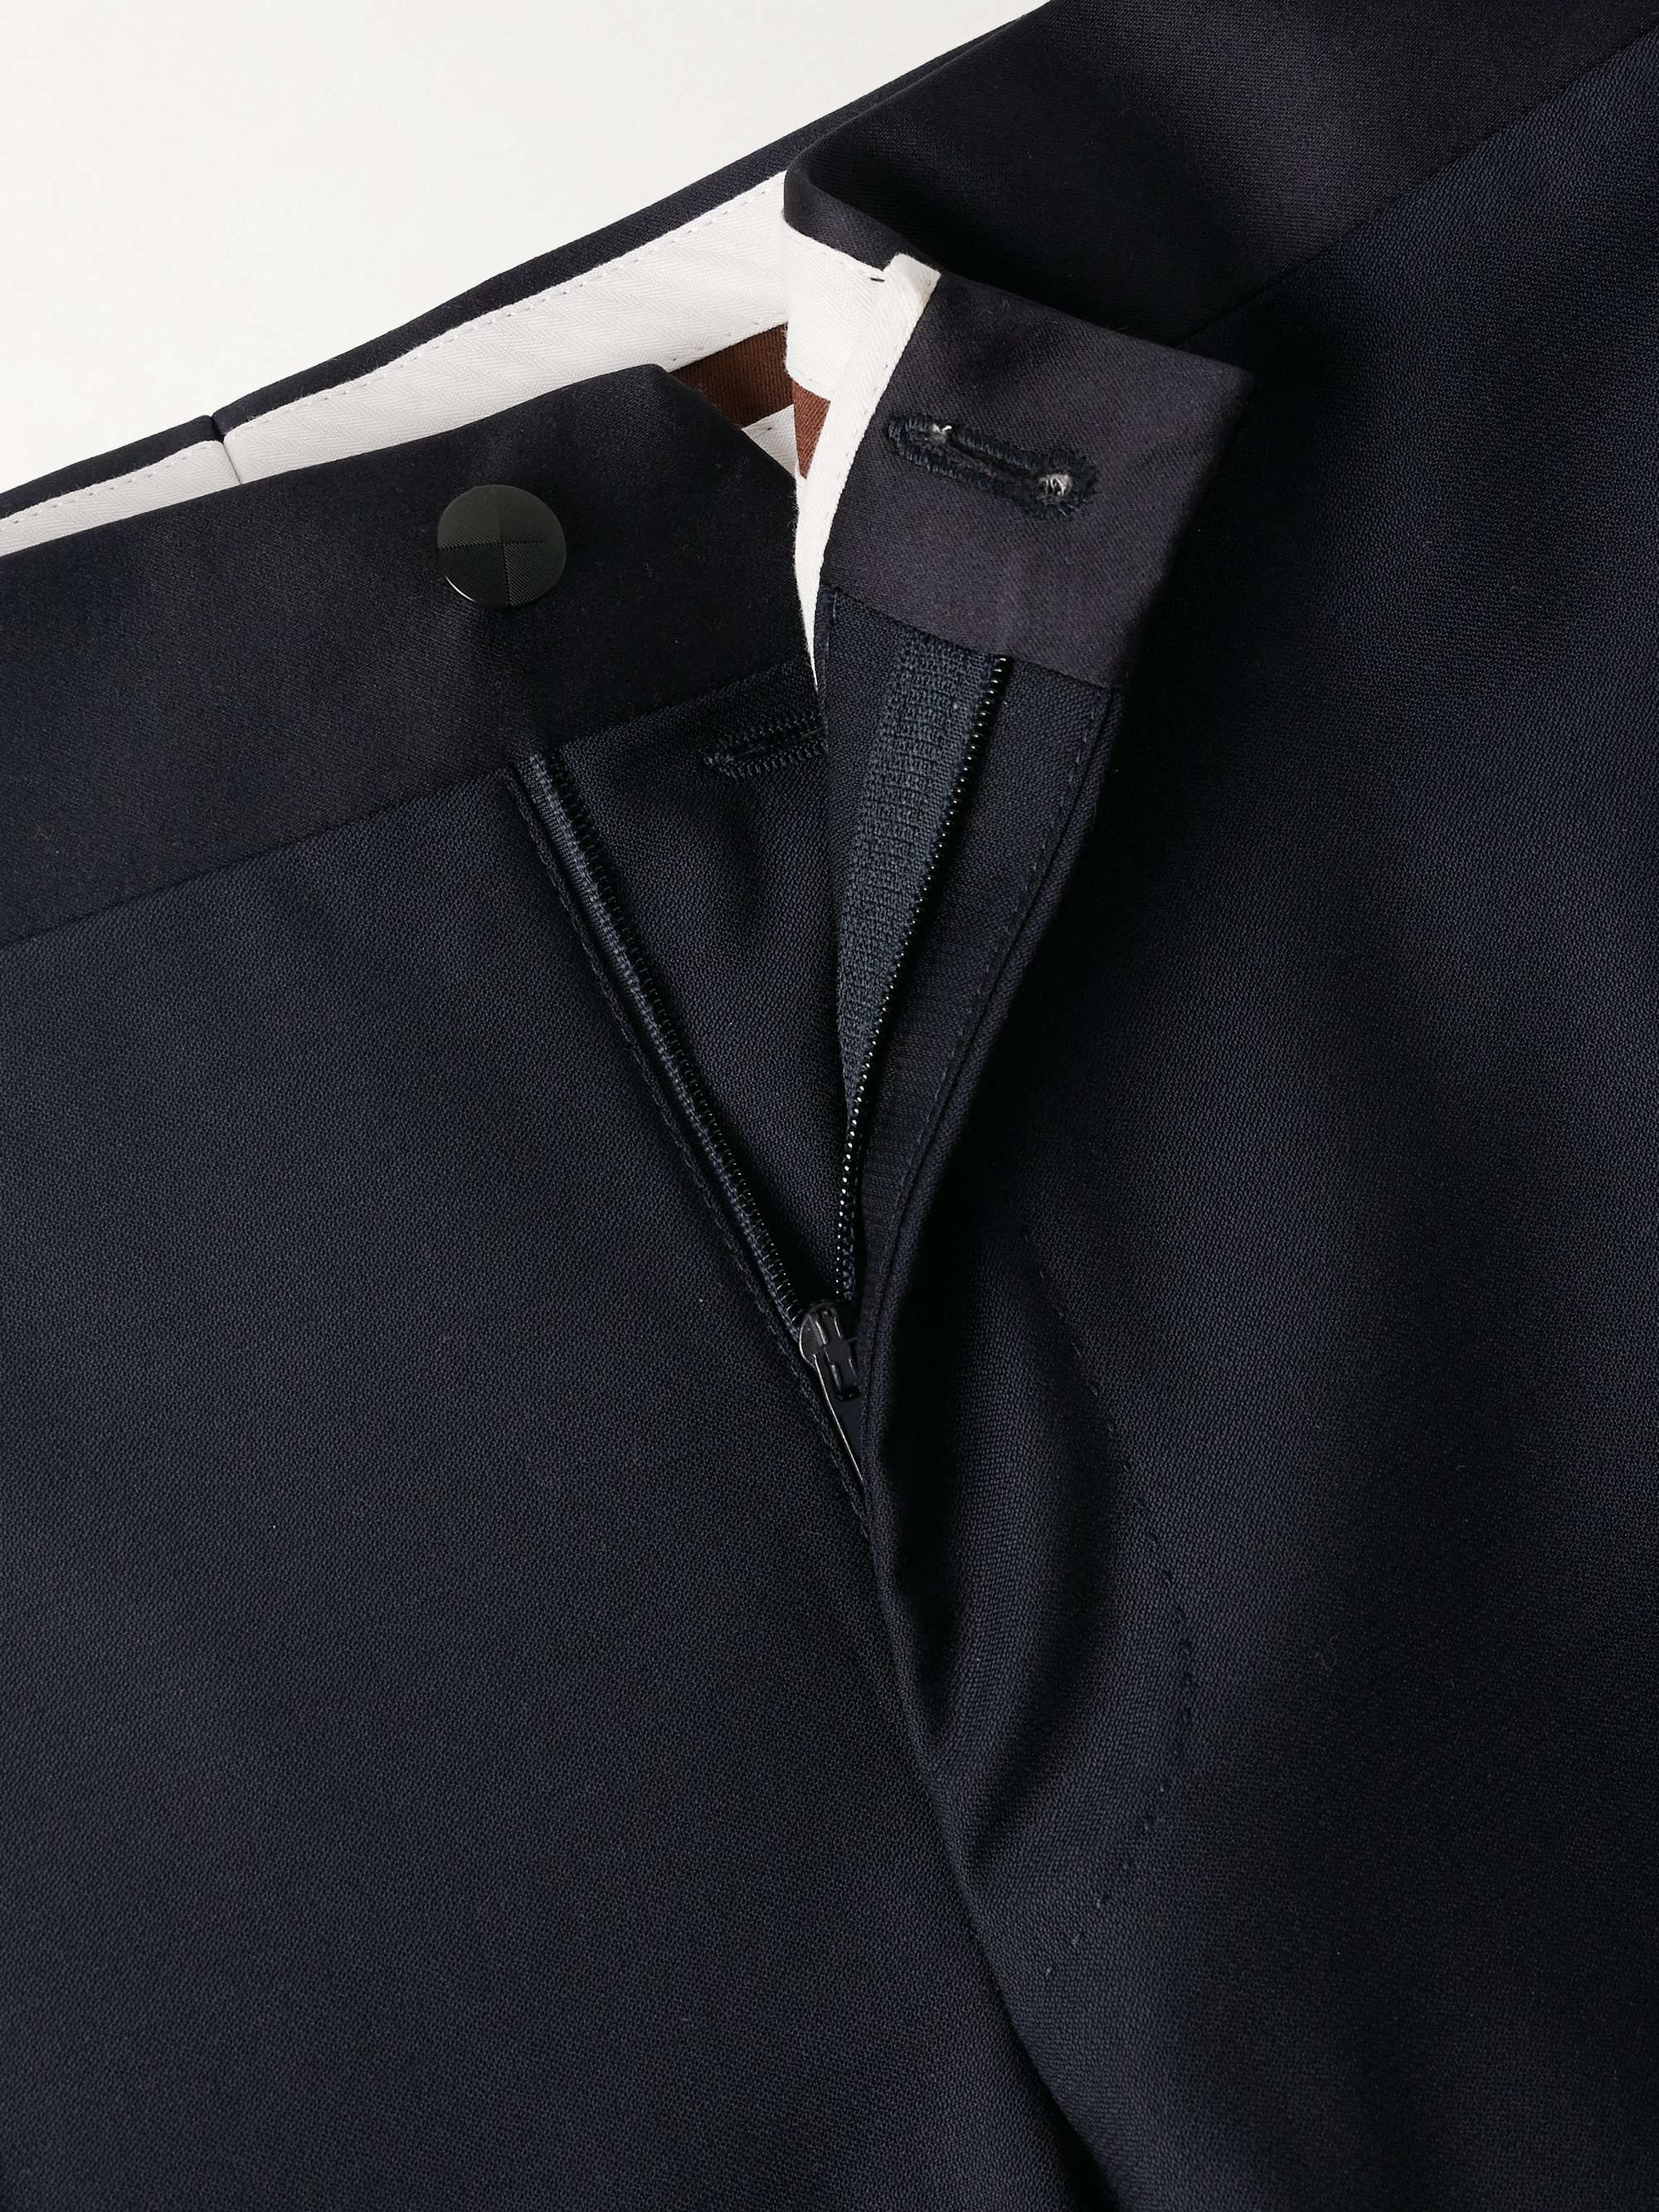 CANALI Slim-Fit Satin-Trimmed Wool Tuxedo Trousers for Men | MR PORTER